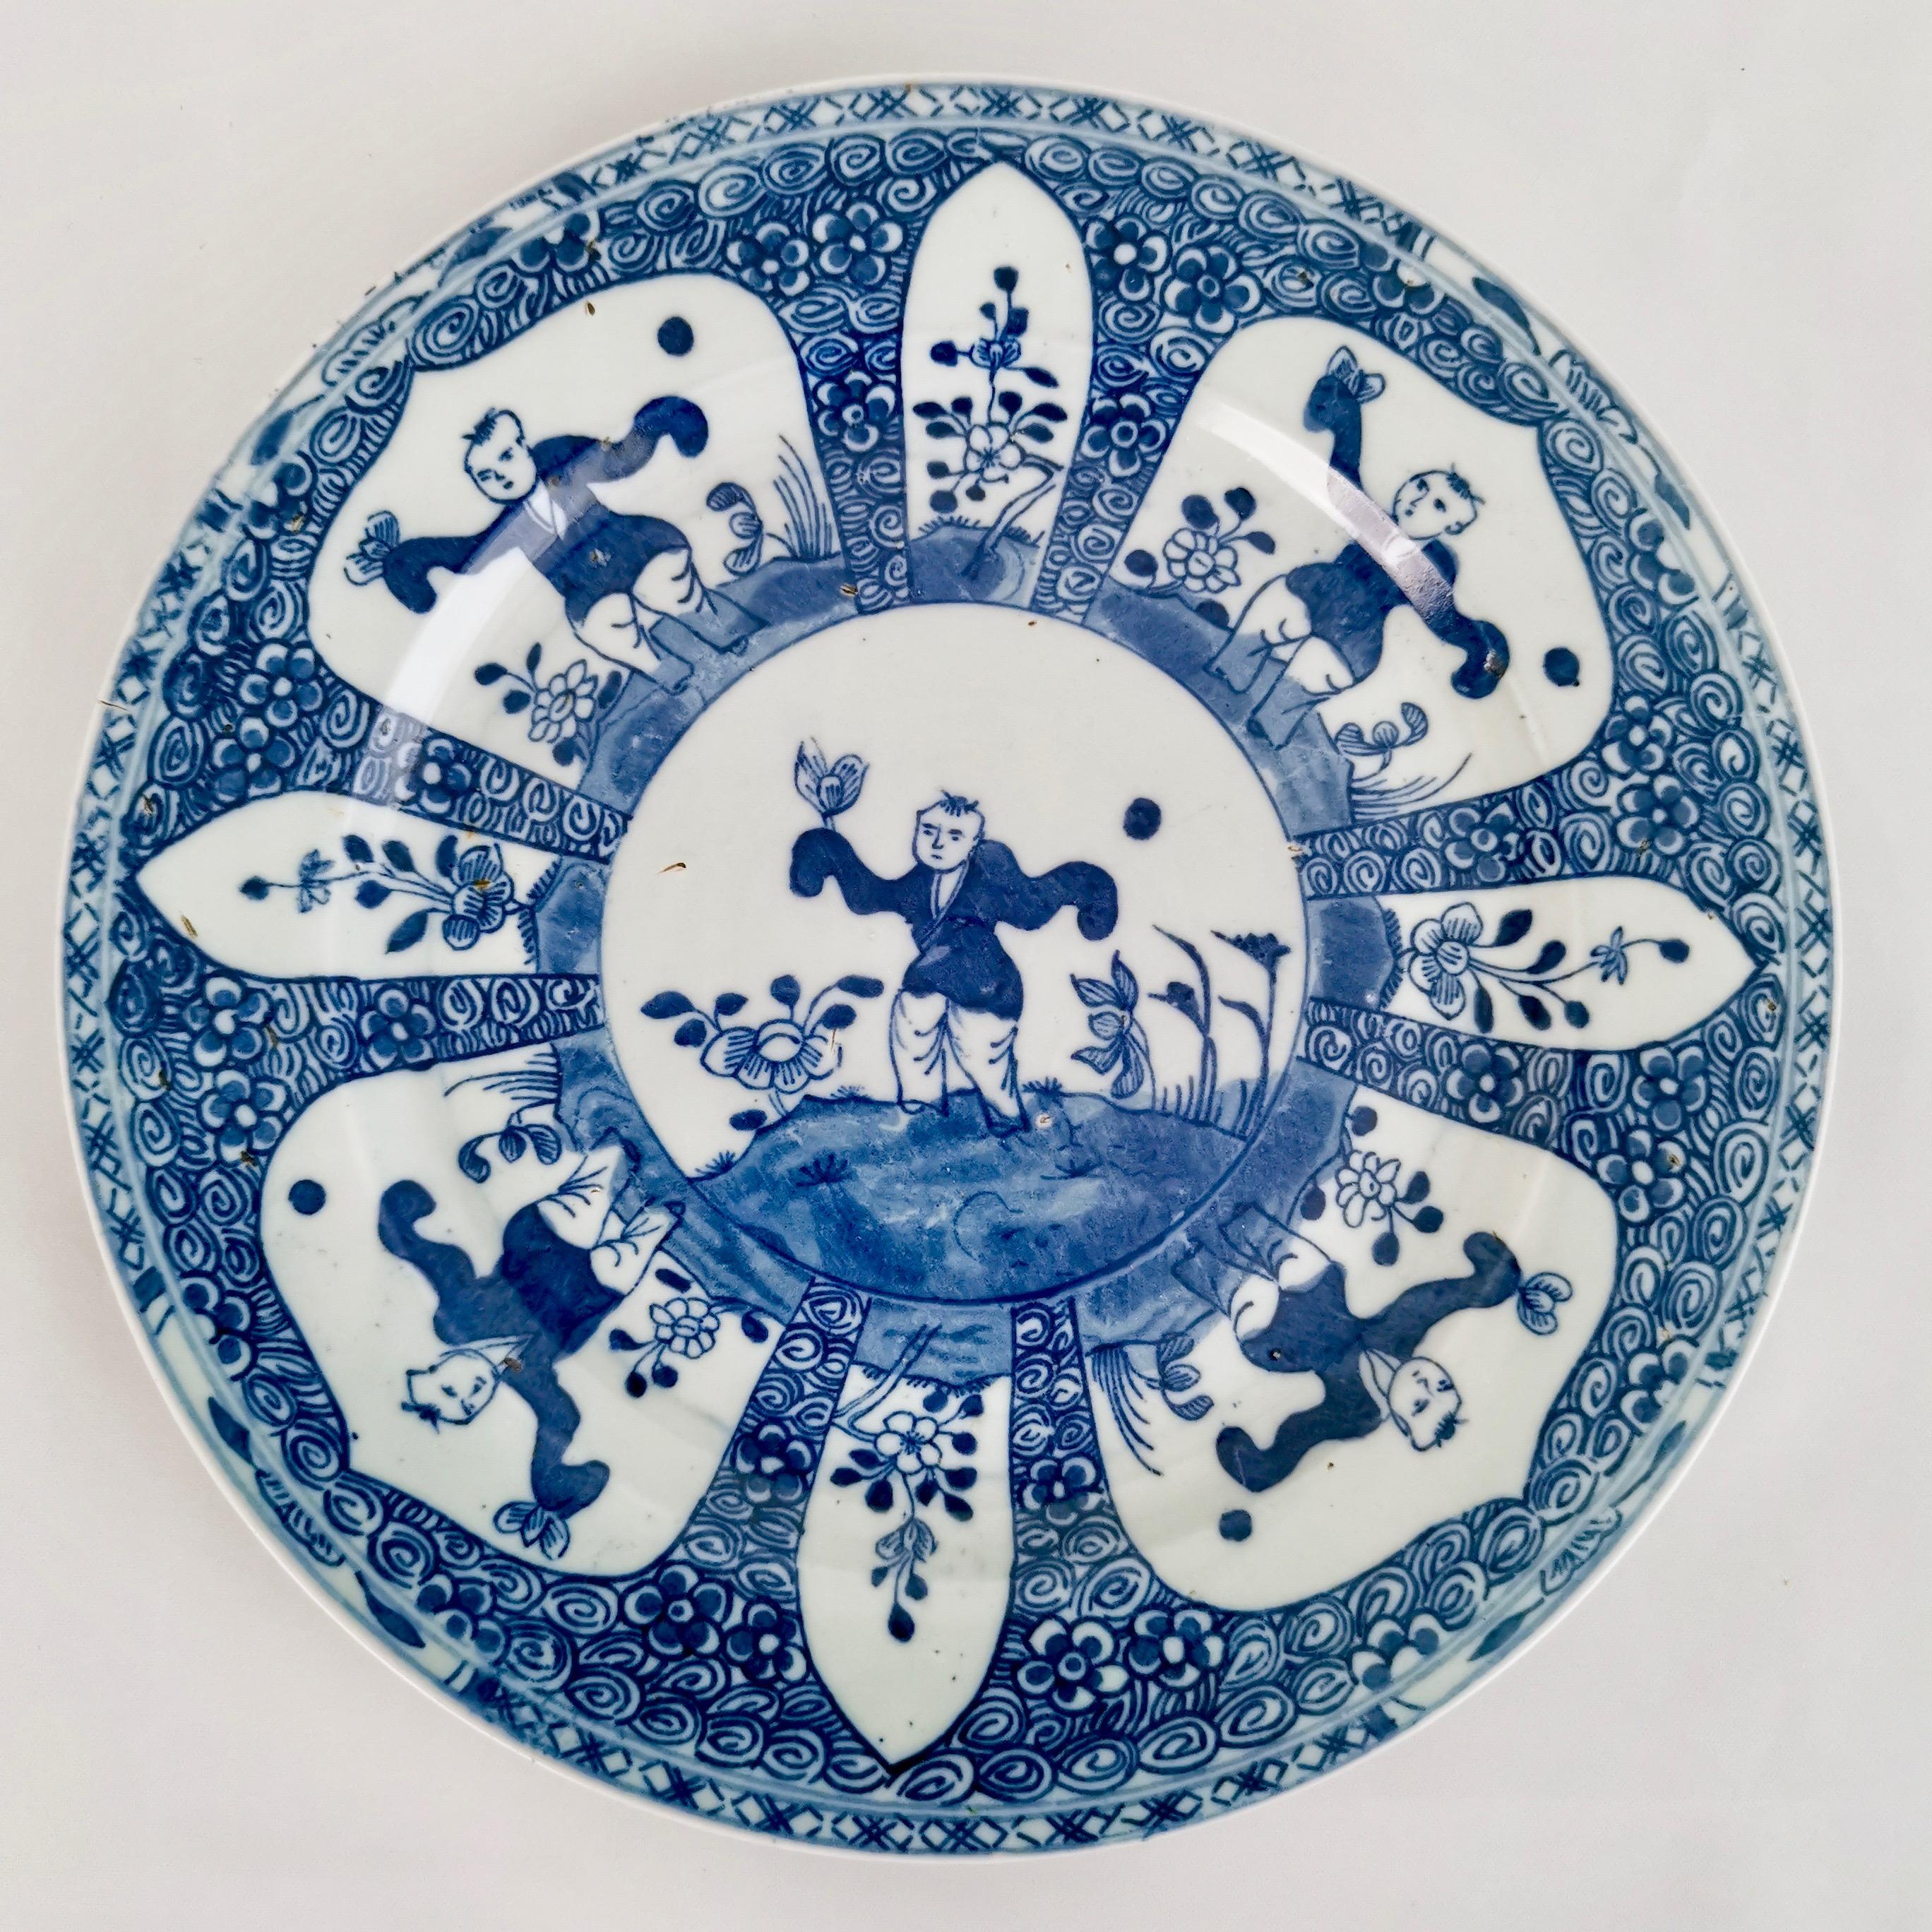 Hand-Painted Set of 5 Chinese Export Plates, Blue and White, Boy with Butterfly, 19th Century